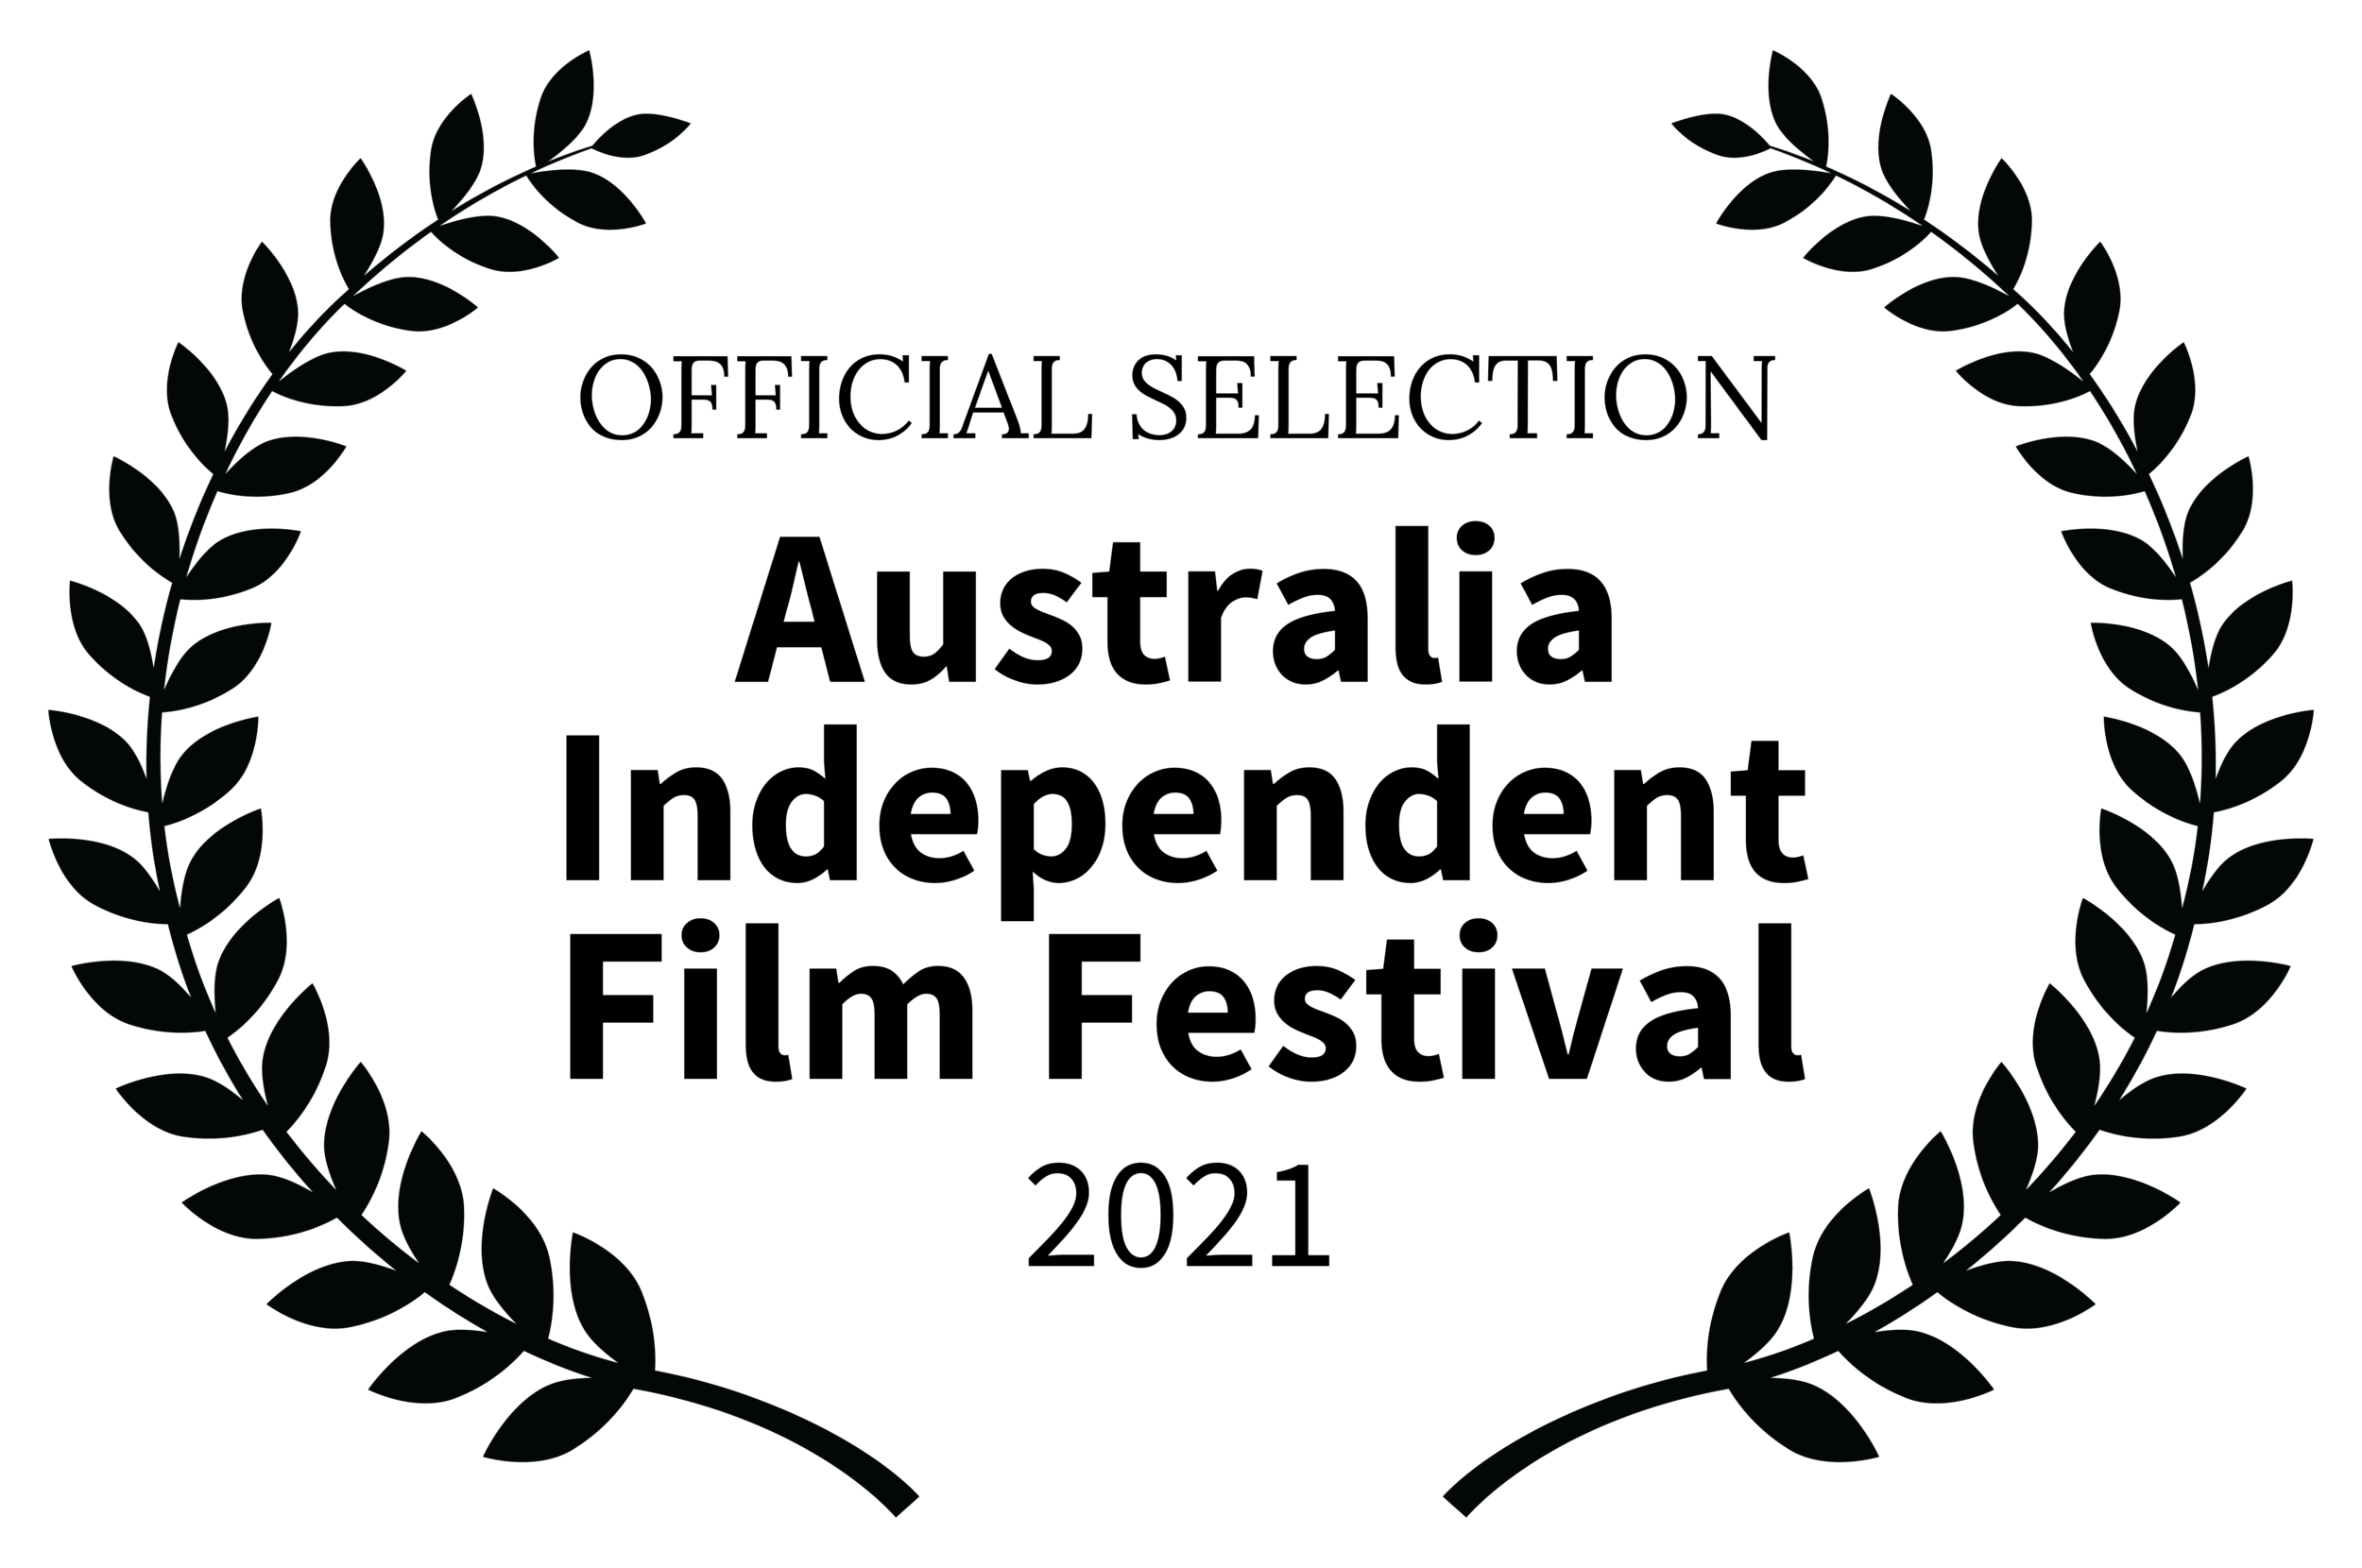 OFFICIALSELECTION-AustraliaIndependentFilmFestival-2021.png